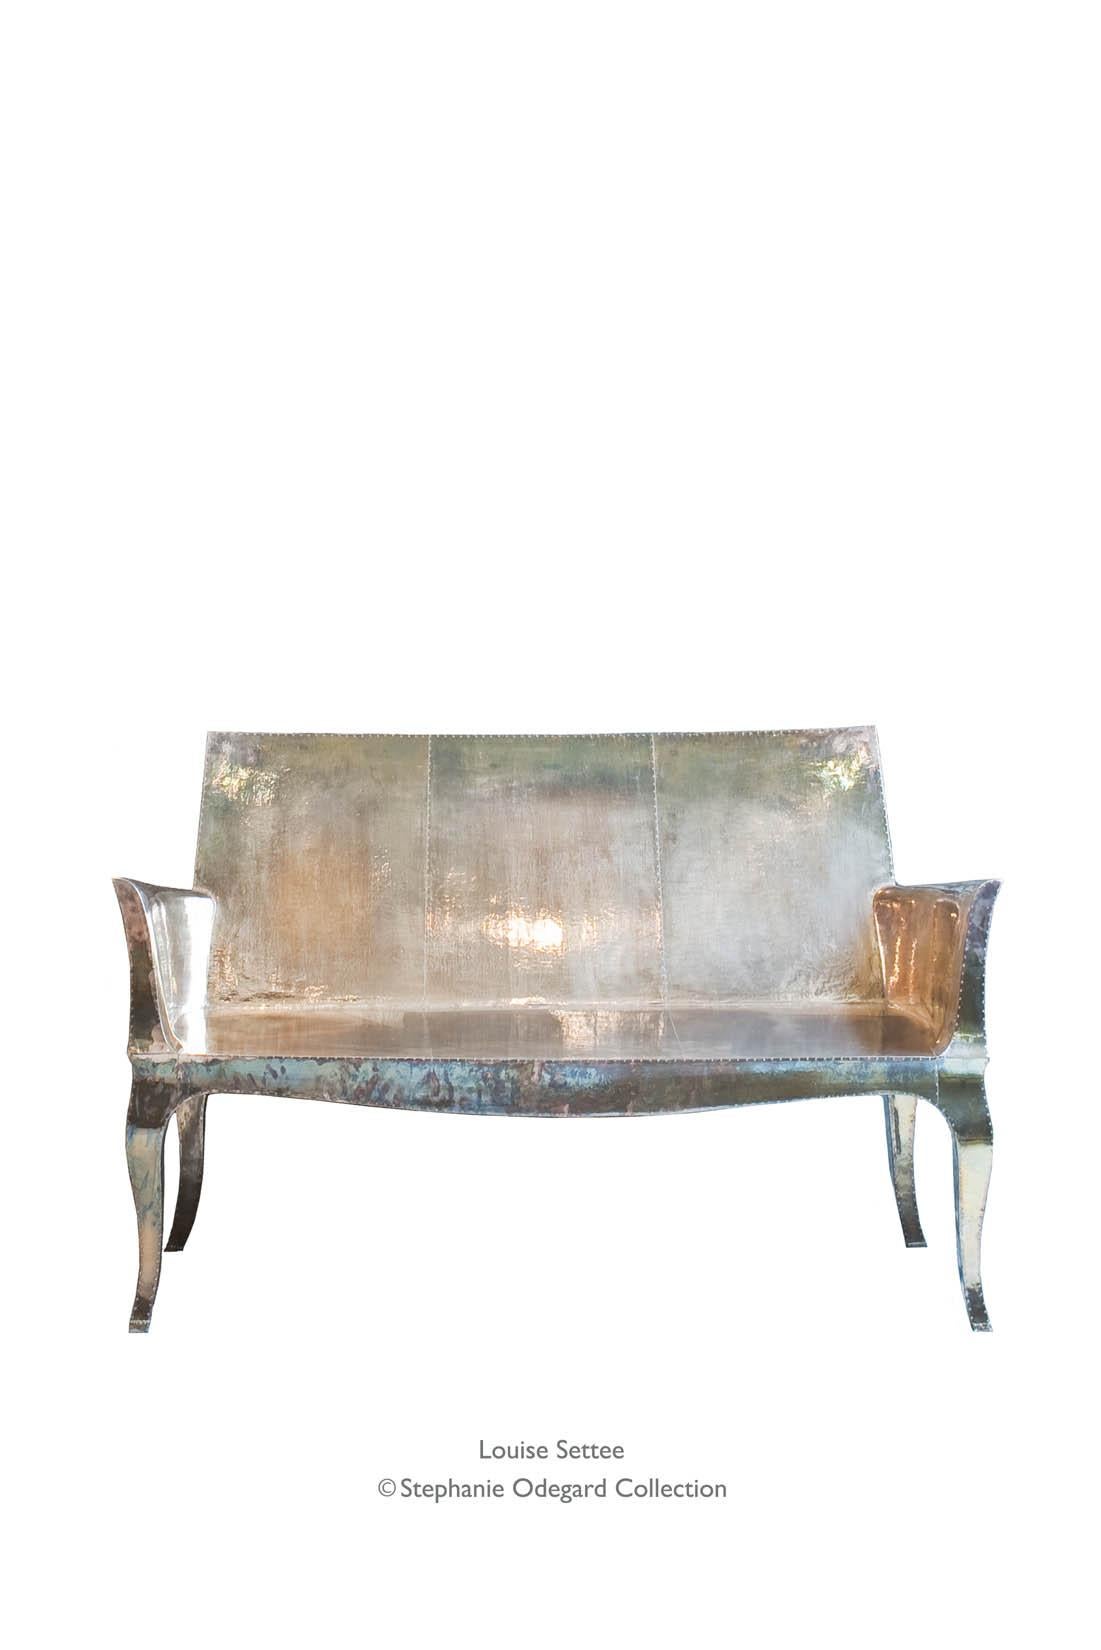 Louise Settee Art Deco Settees in Mid. Hammered Antique Bronze by Paul Mathieu For Sale 6